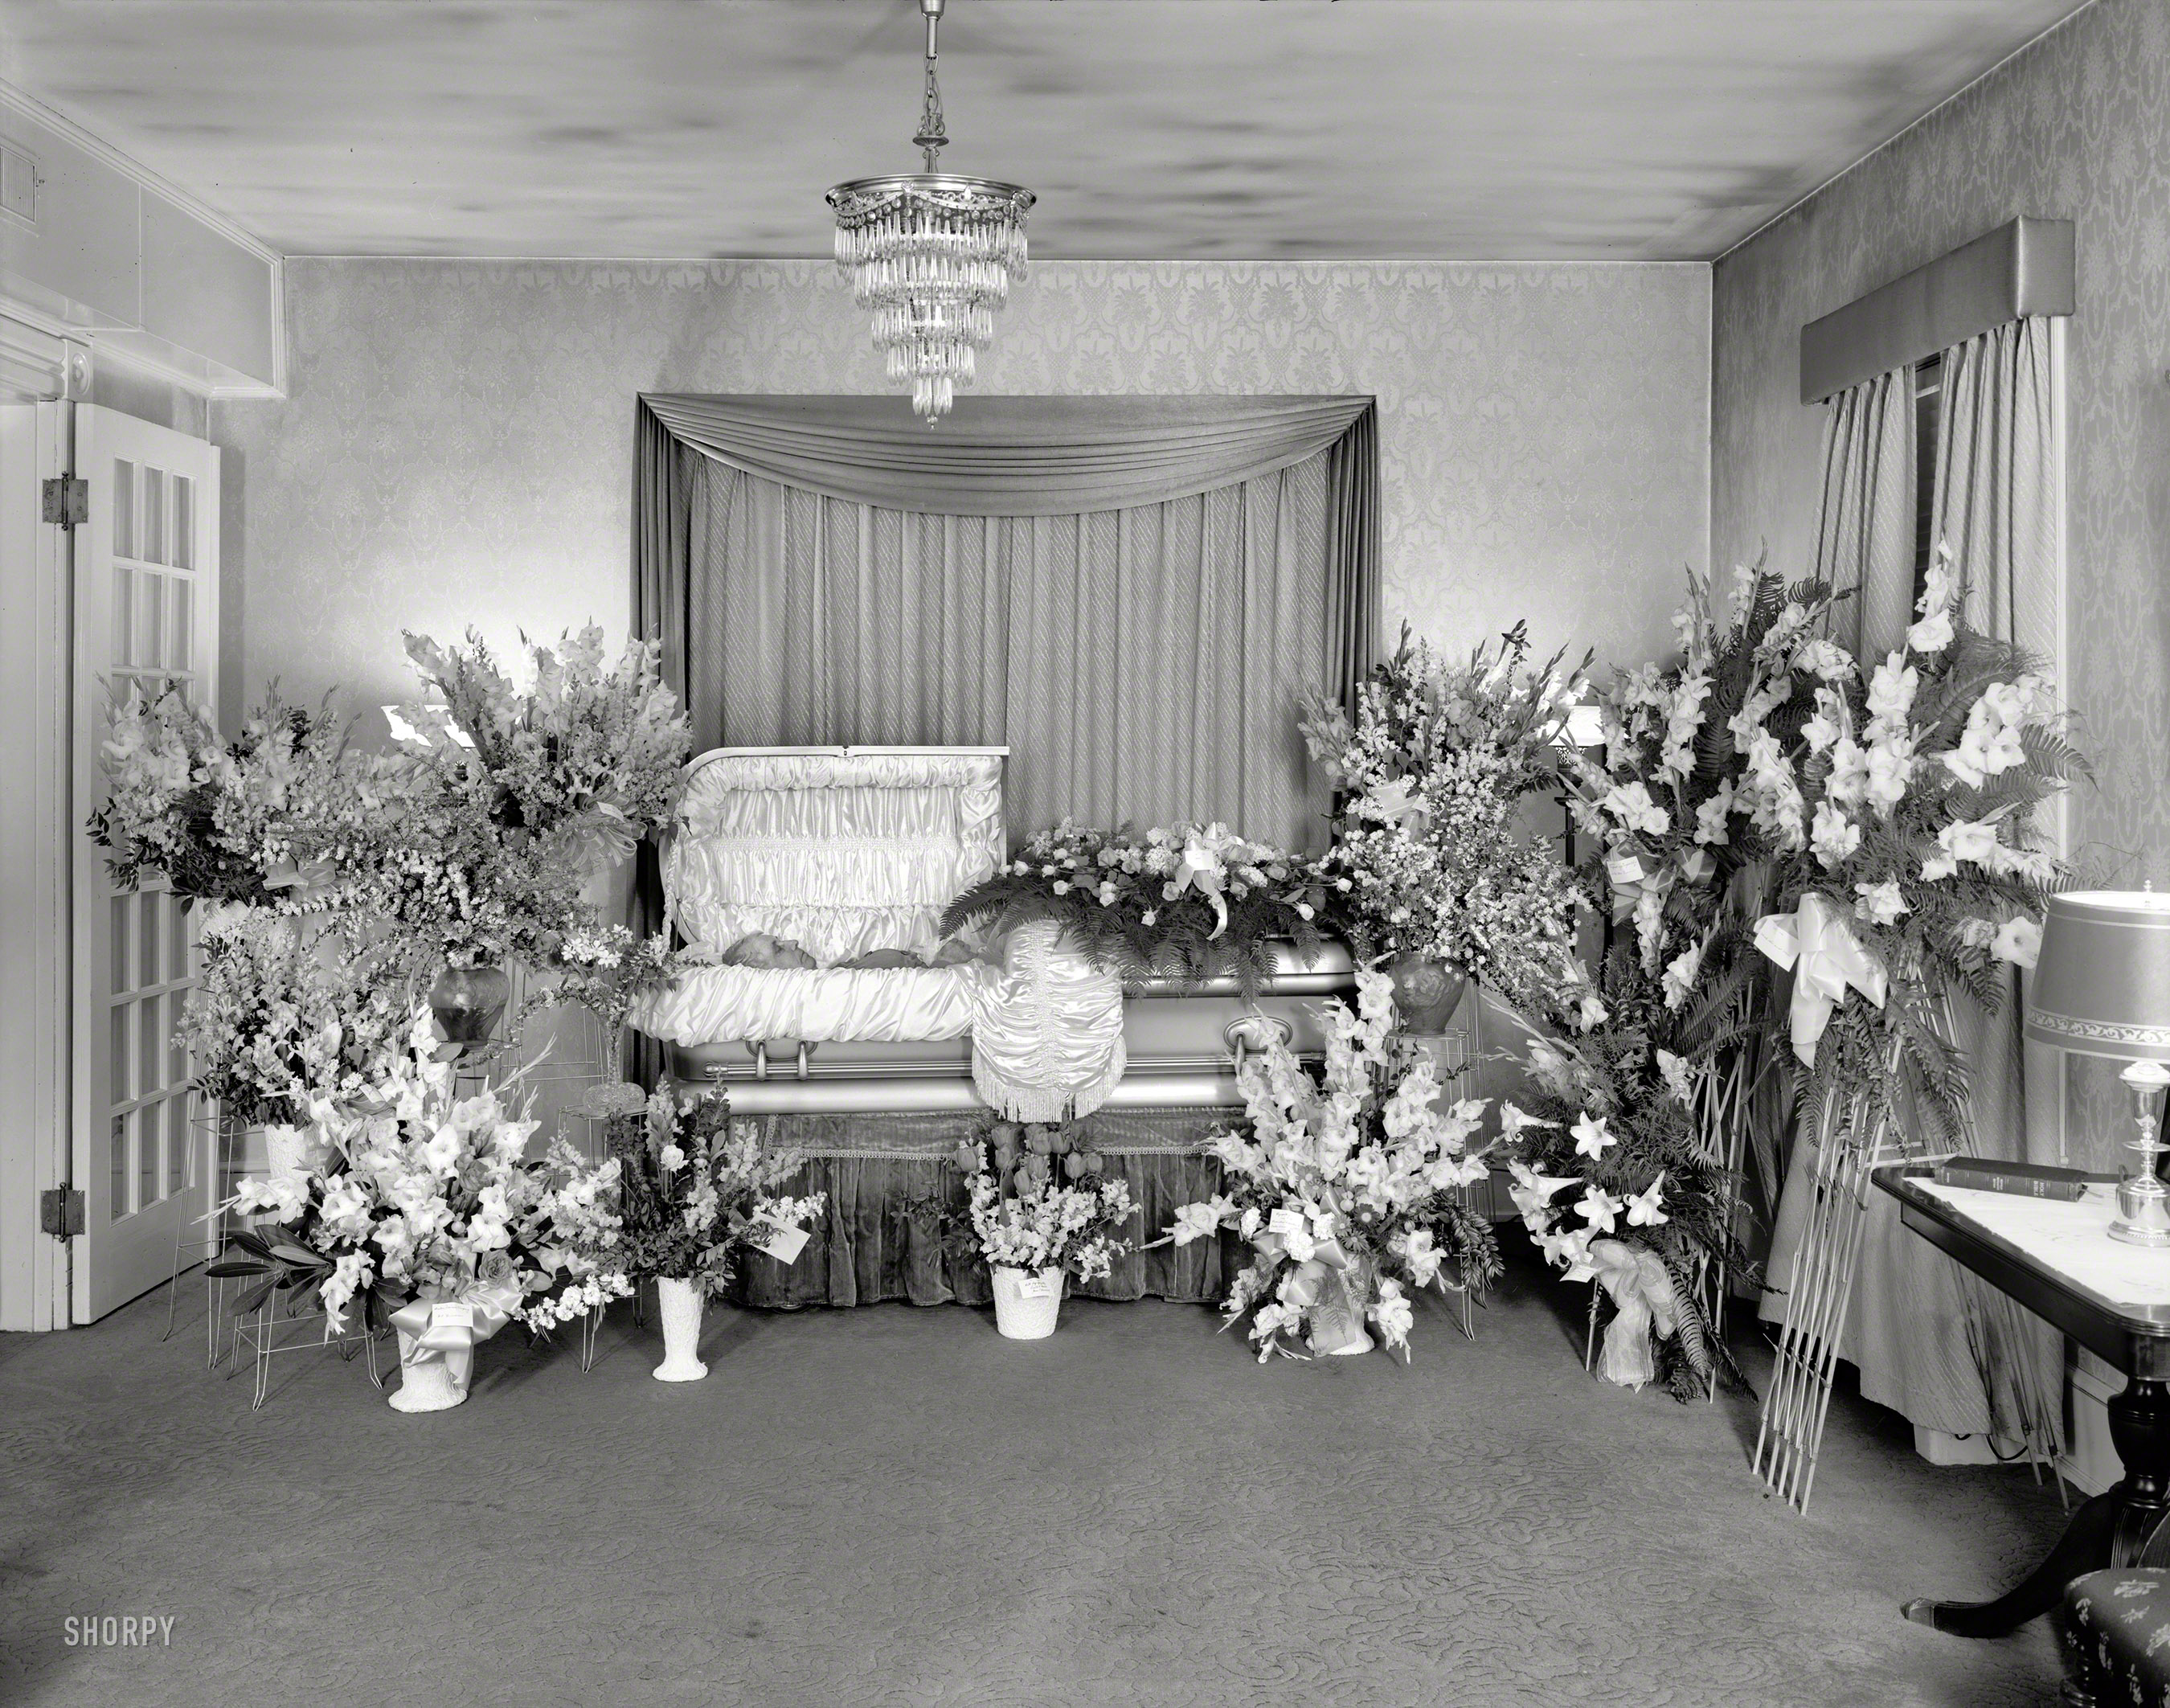 May 1950. Washington, D.C. "Miss Dorothy Torr [client]. Funeral flowers." Rose Bell Torr in repose. Safety negative by Theodor Horydczak. View full size.